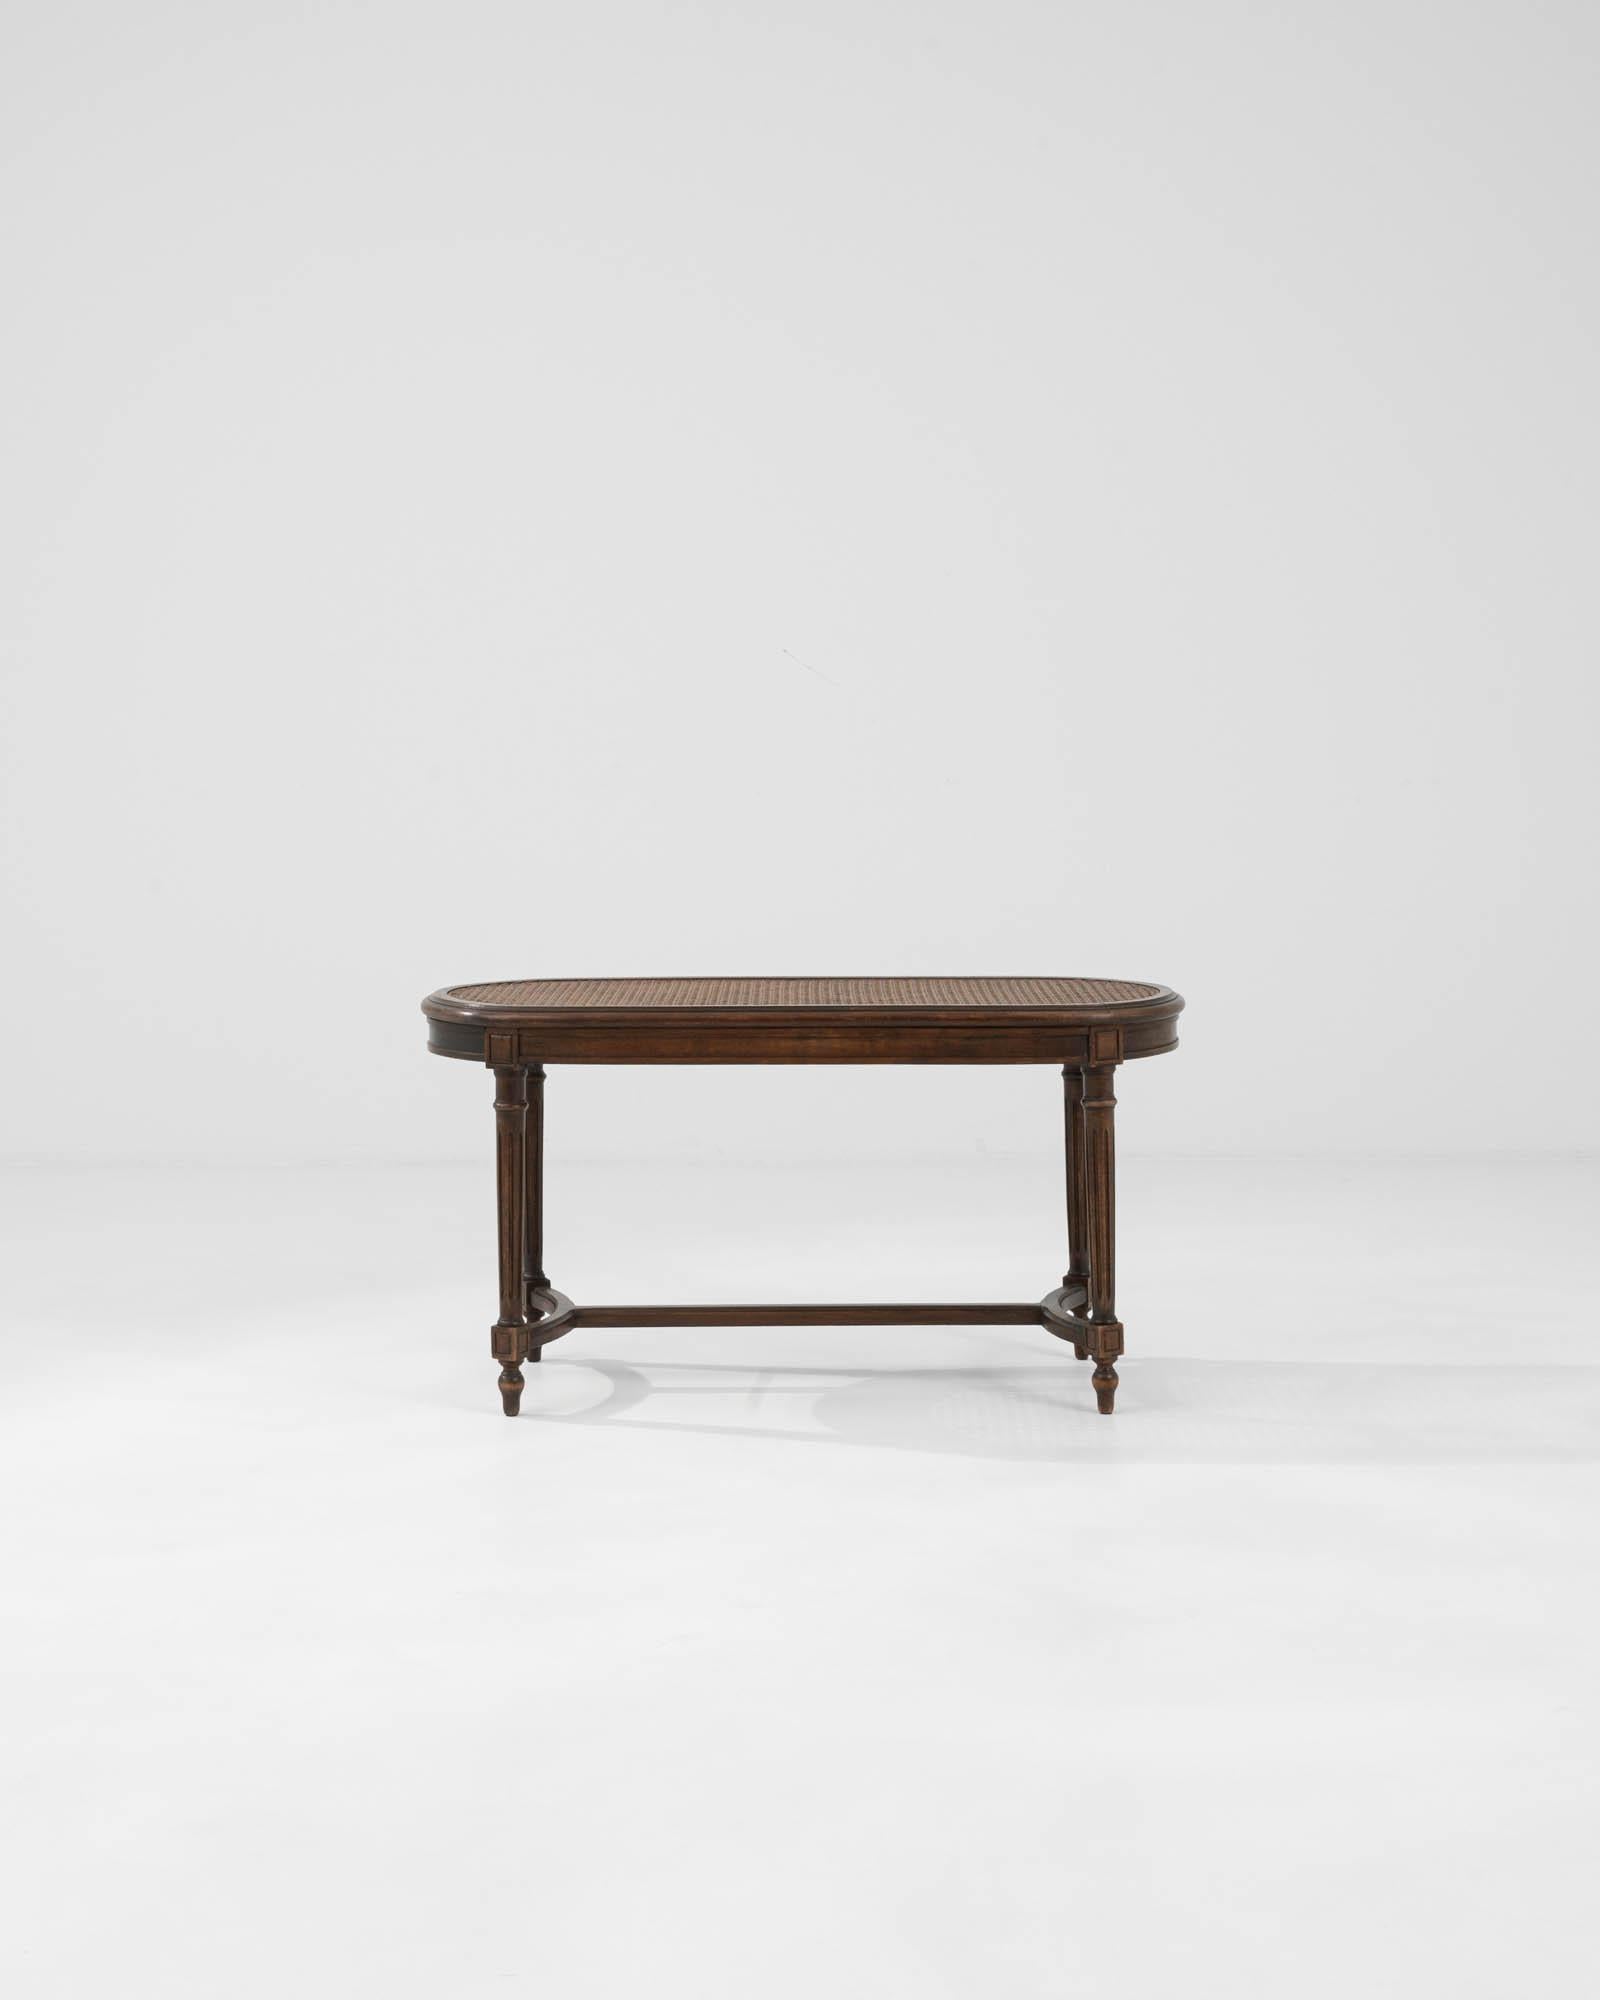 Introducing our exquisite Early 20th Century French Wooden Bench, reminiscent of the opulent Louis XVI style benches crafted in the early twentieth century. Made with precision and finesse in France, this bench epitomizes the elegance and grace of